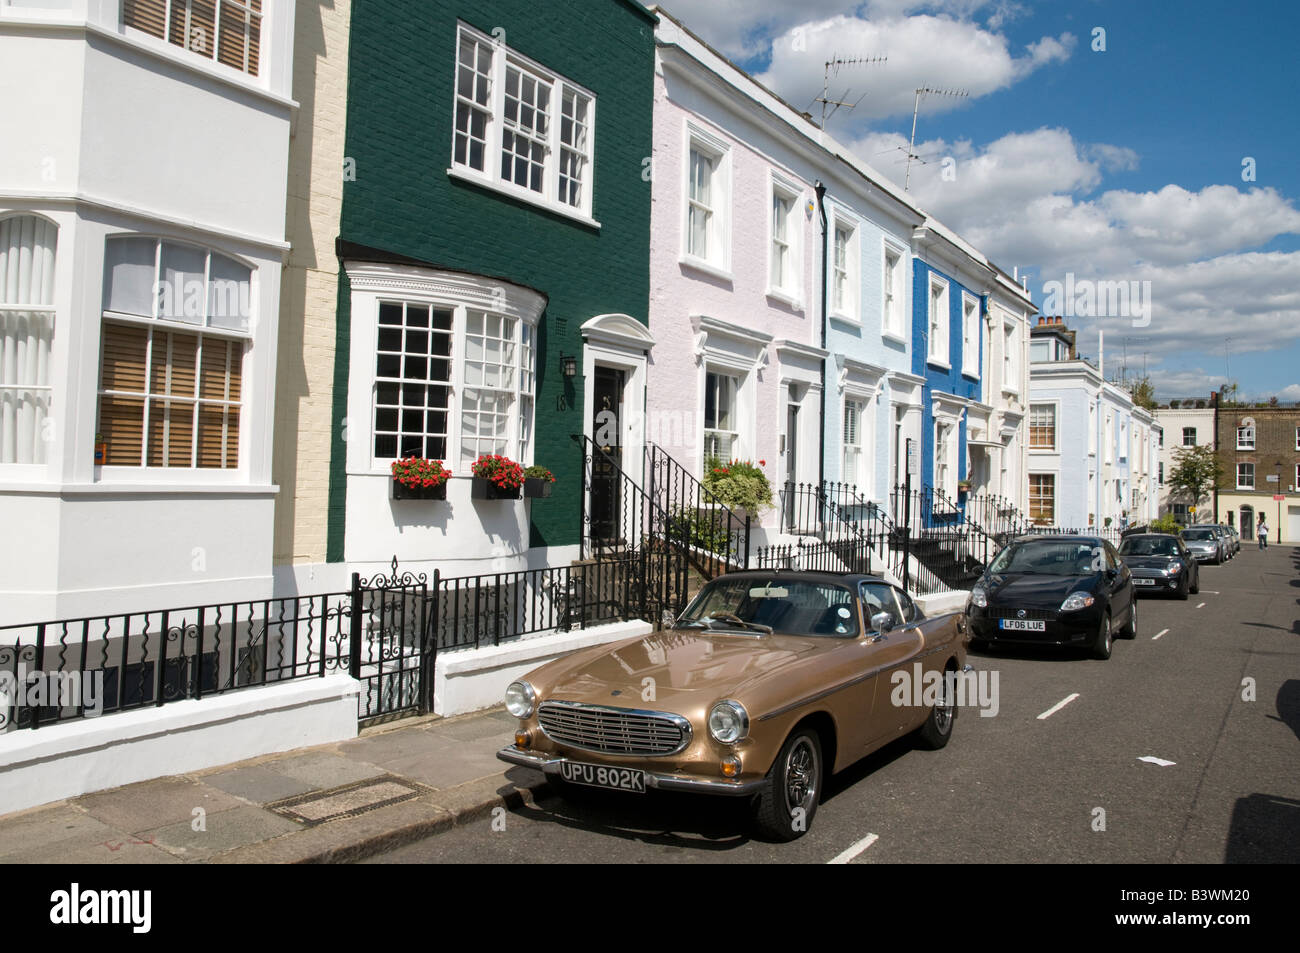 Row of expensive terraced houses in Hillgate Place, a residential street in Notting Hill, London England UK Stock Photo